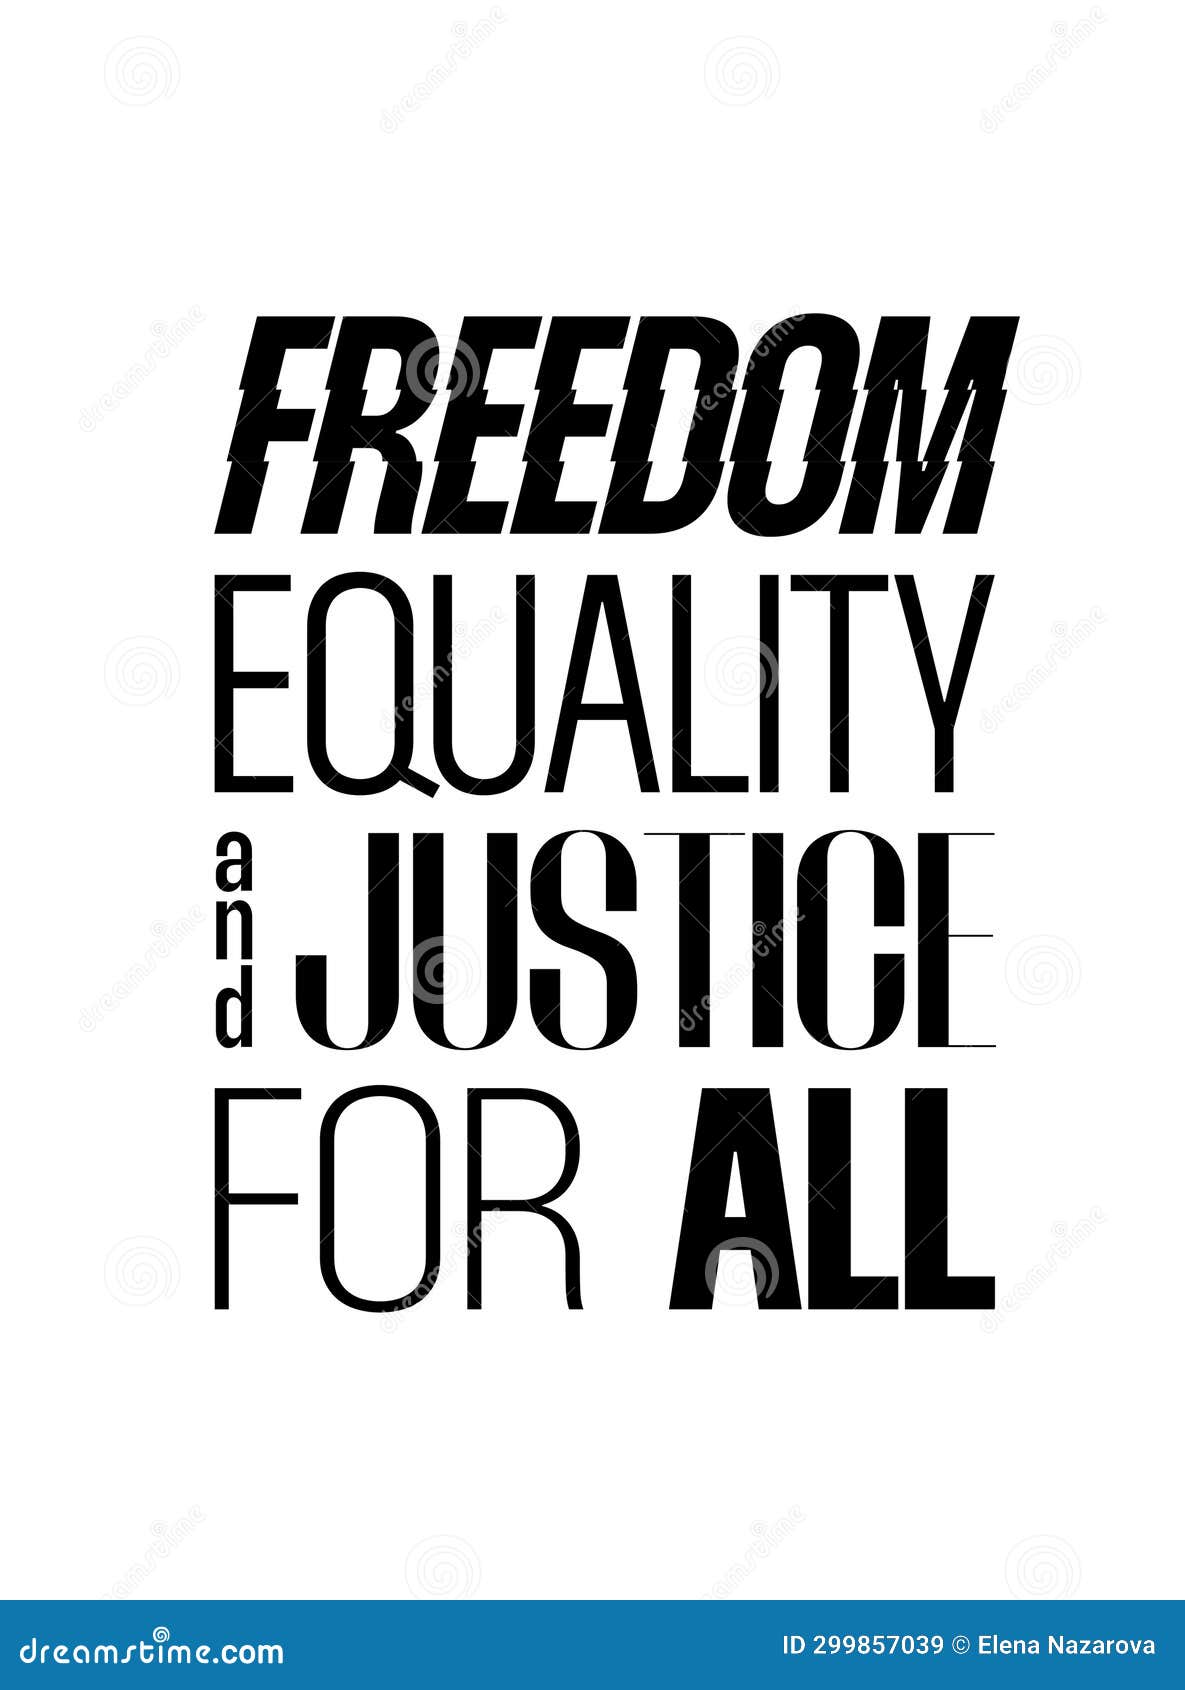 International Human Rights Day Theme. Freedom, Equality and Justice for ...